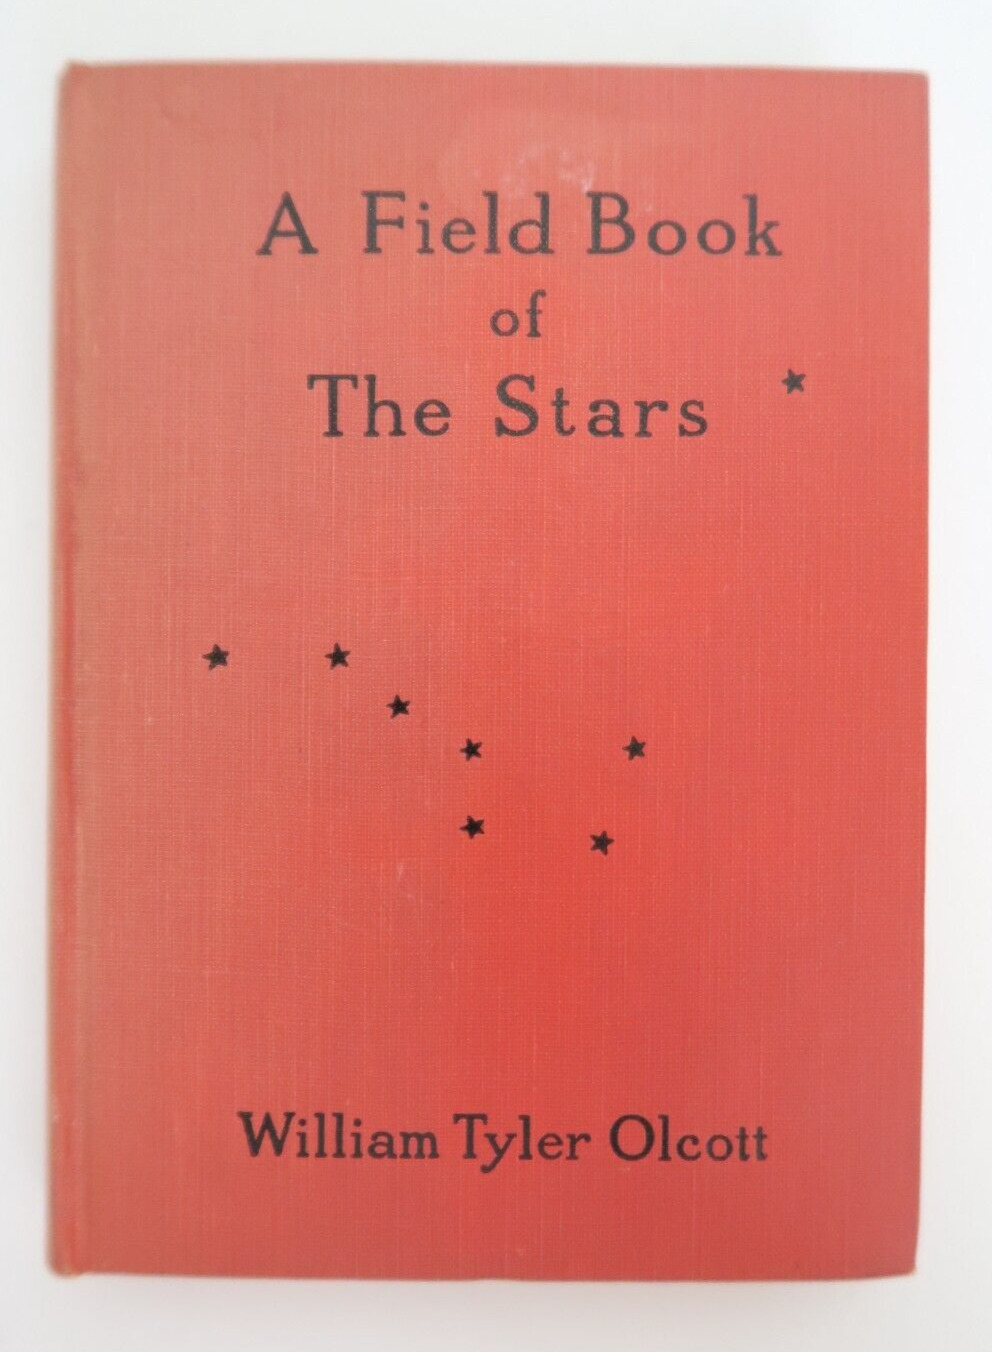 A Field Book of The Stars William Tyler Olcott Vintage Book 1935 G.P. Putnams